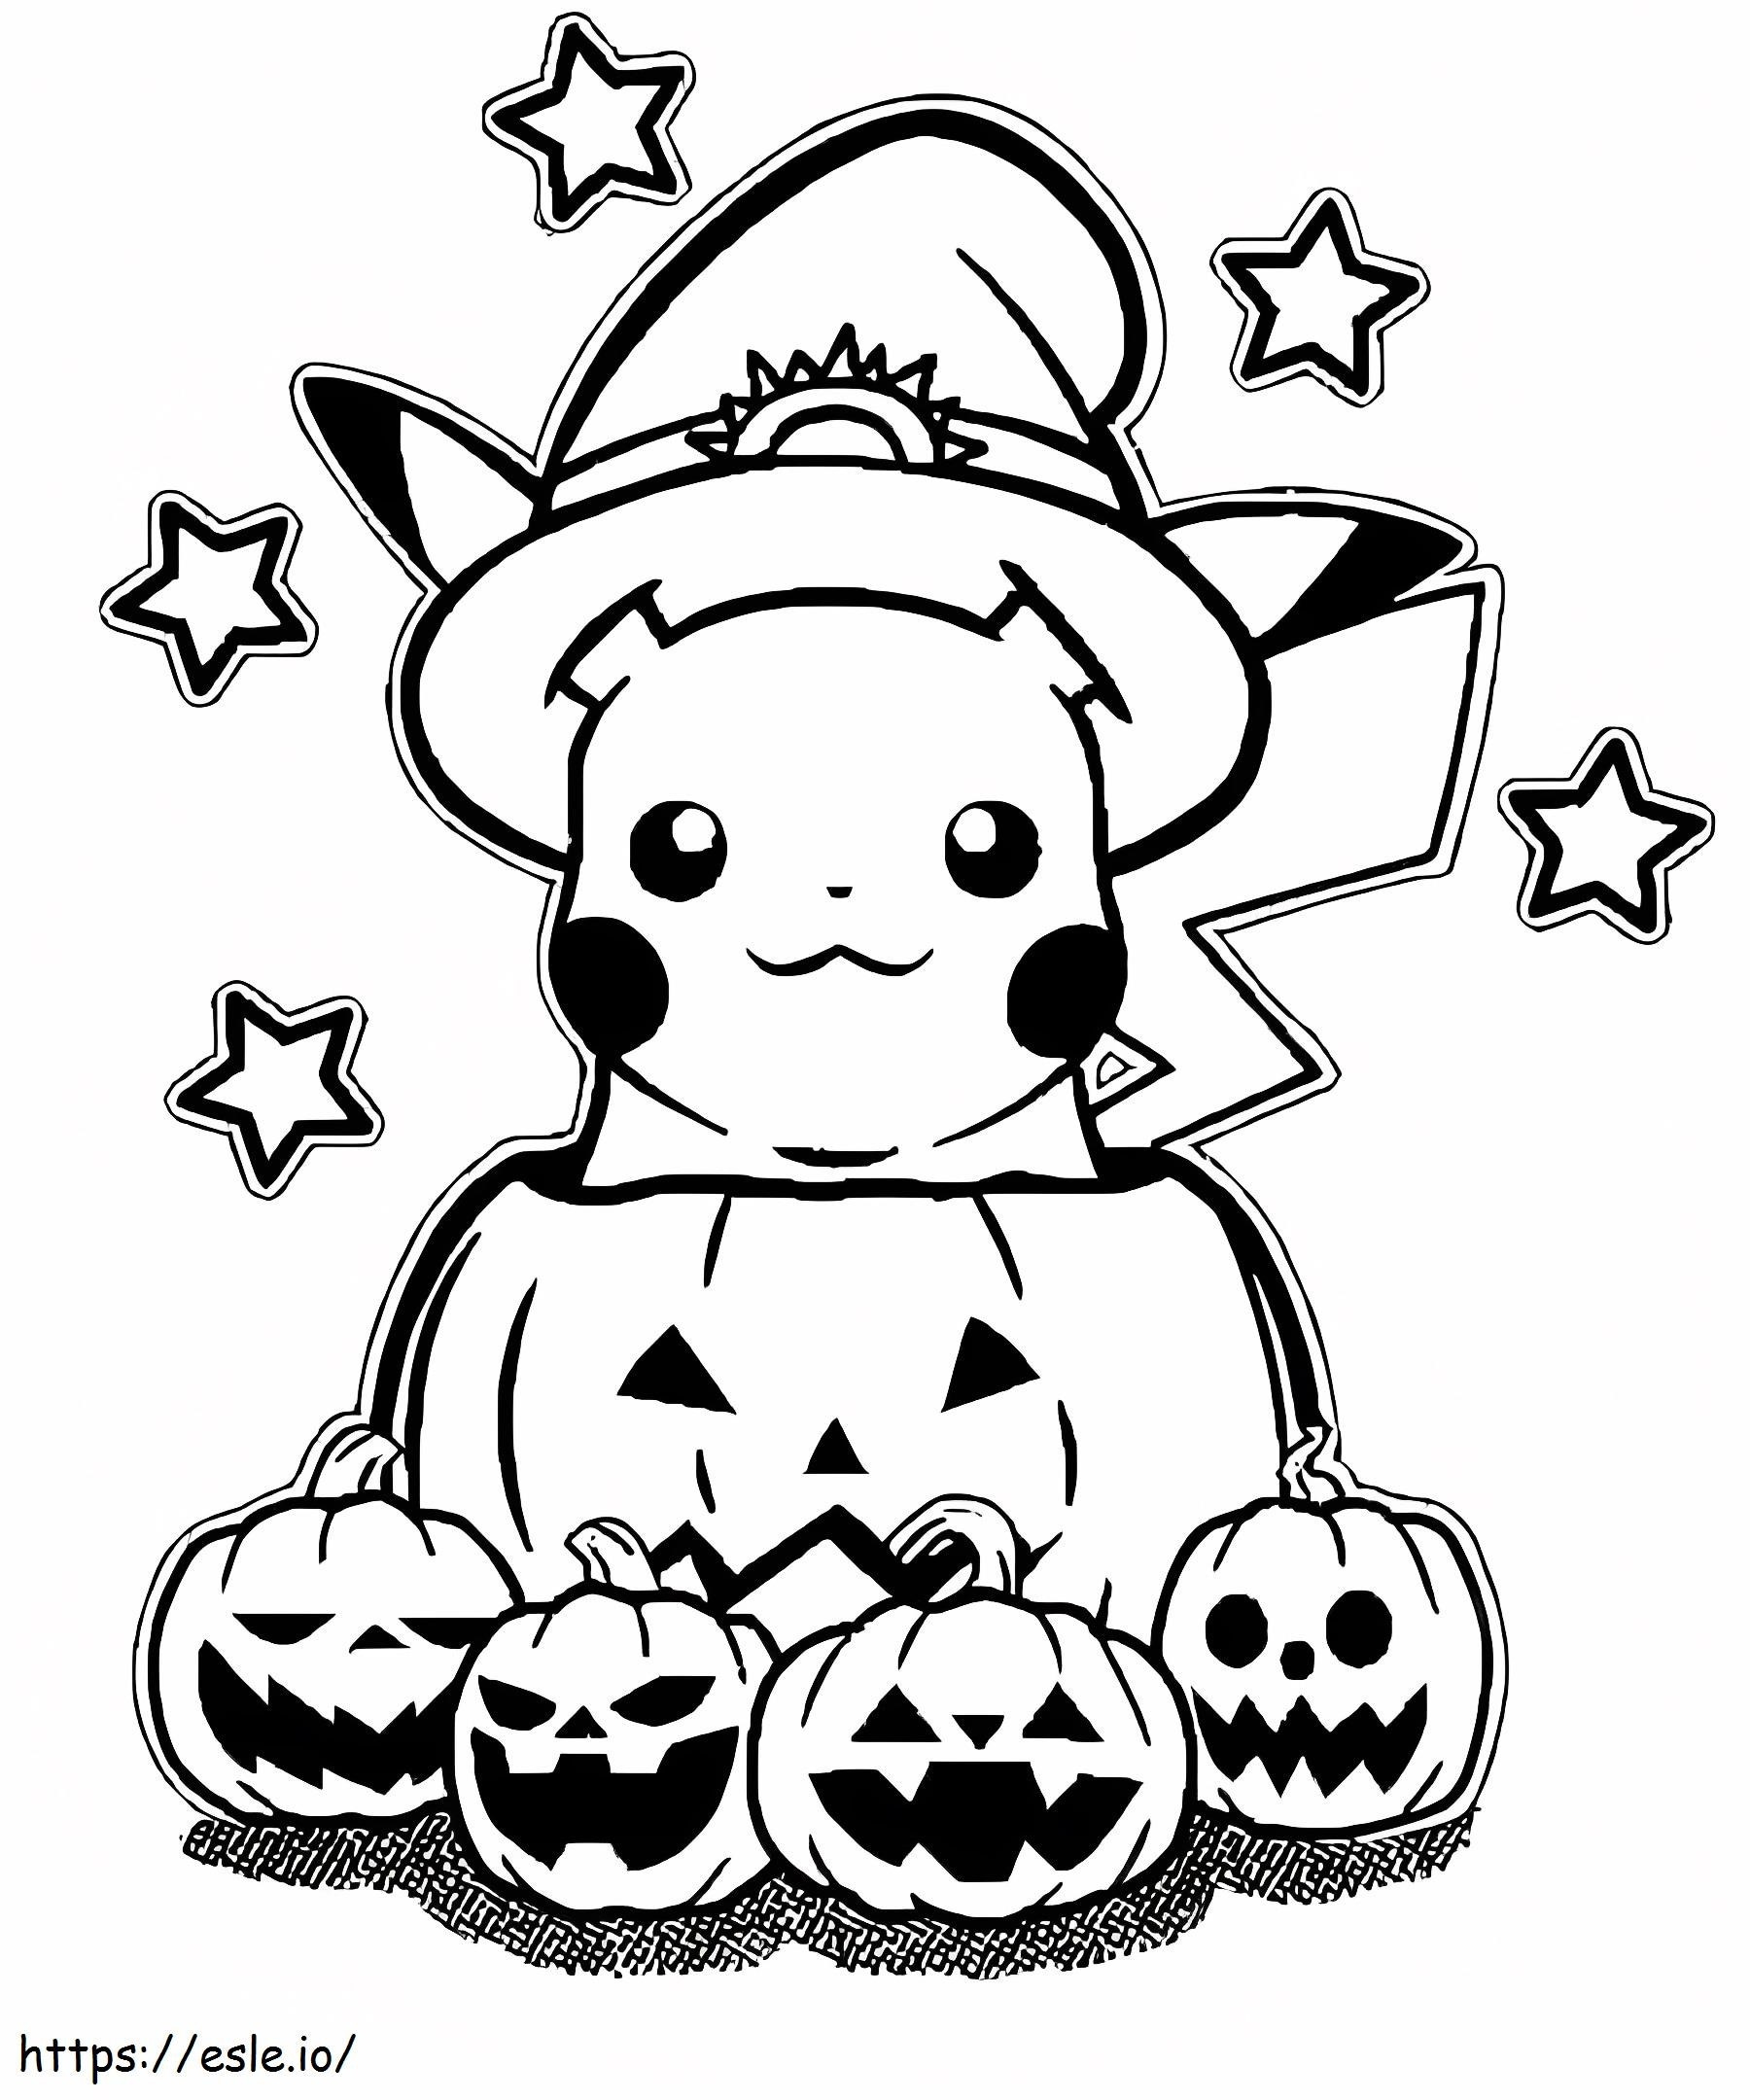 Halloween Pikachu coloring page